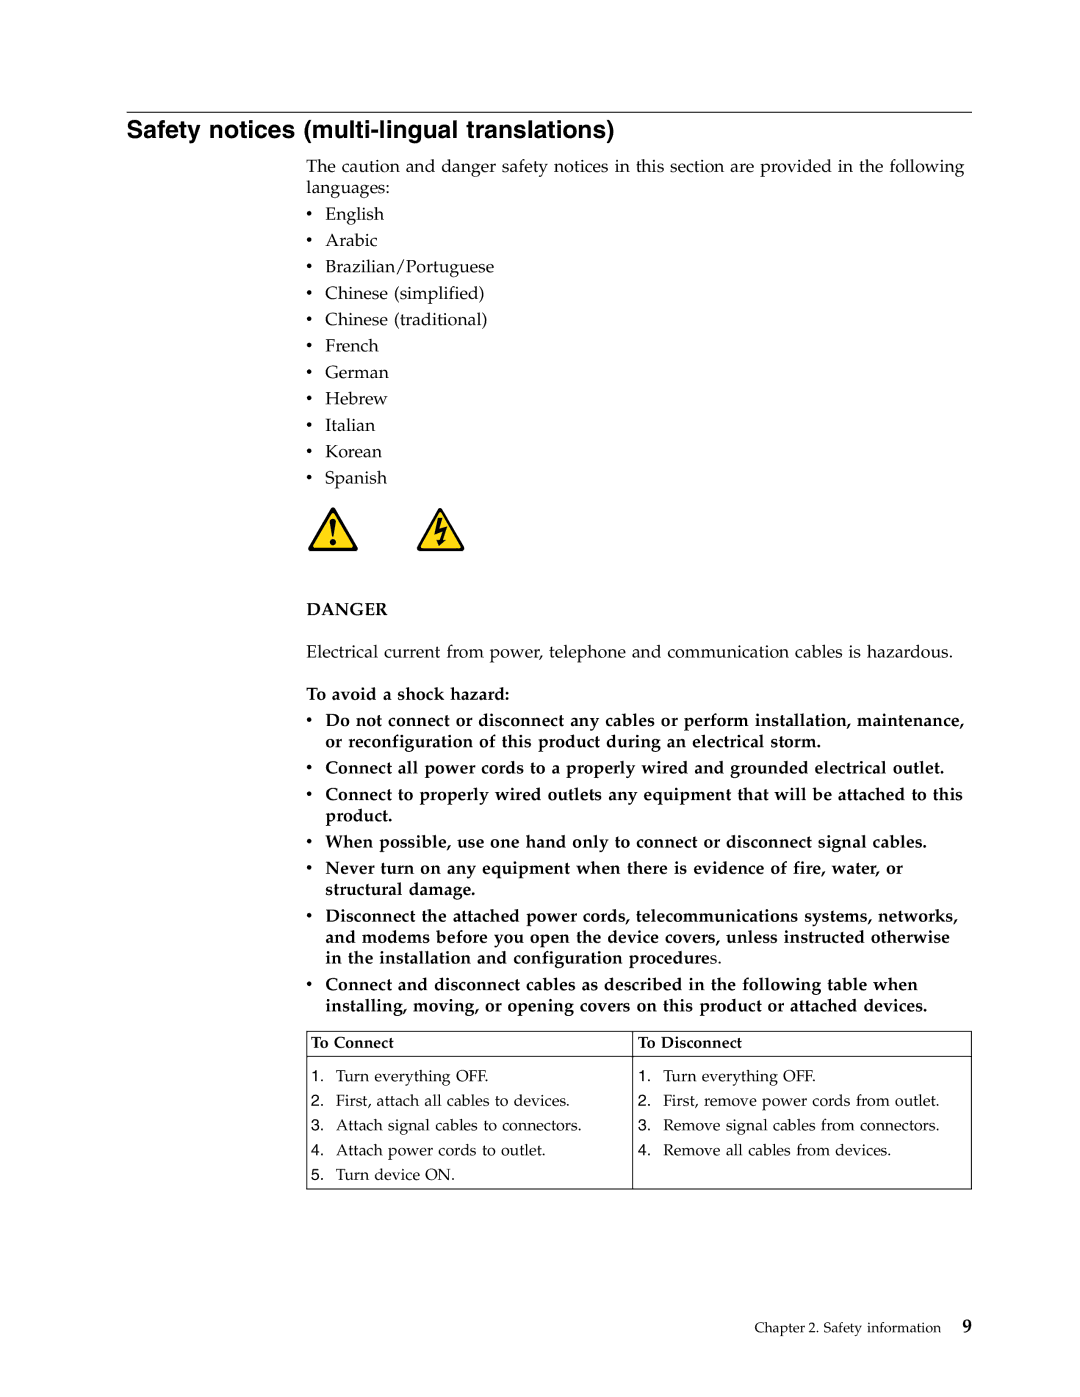 Lenovo E200 manual Safety notices multi-lingual translations, To Connect To Disconnect 